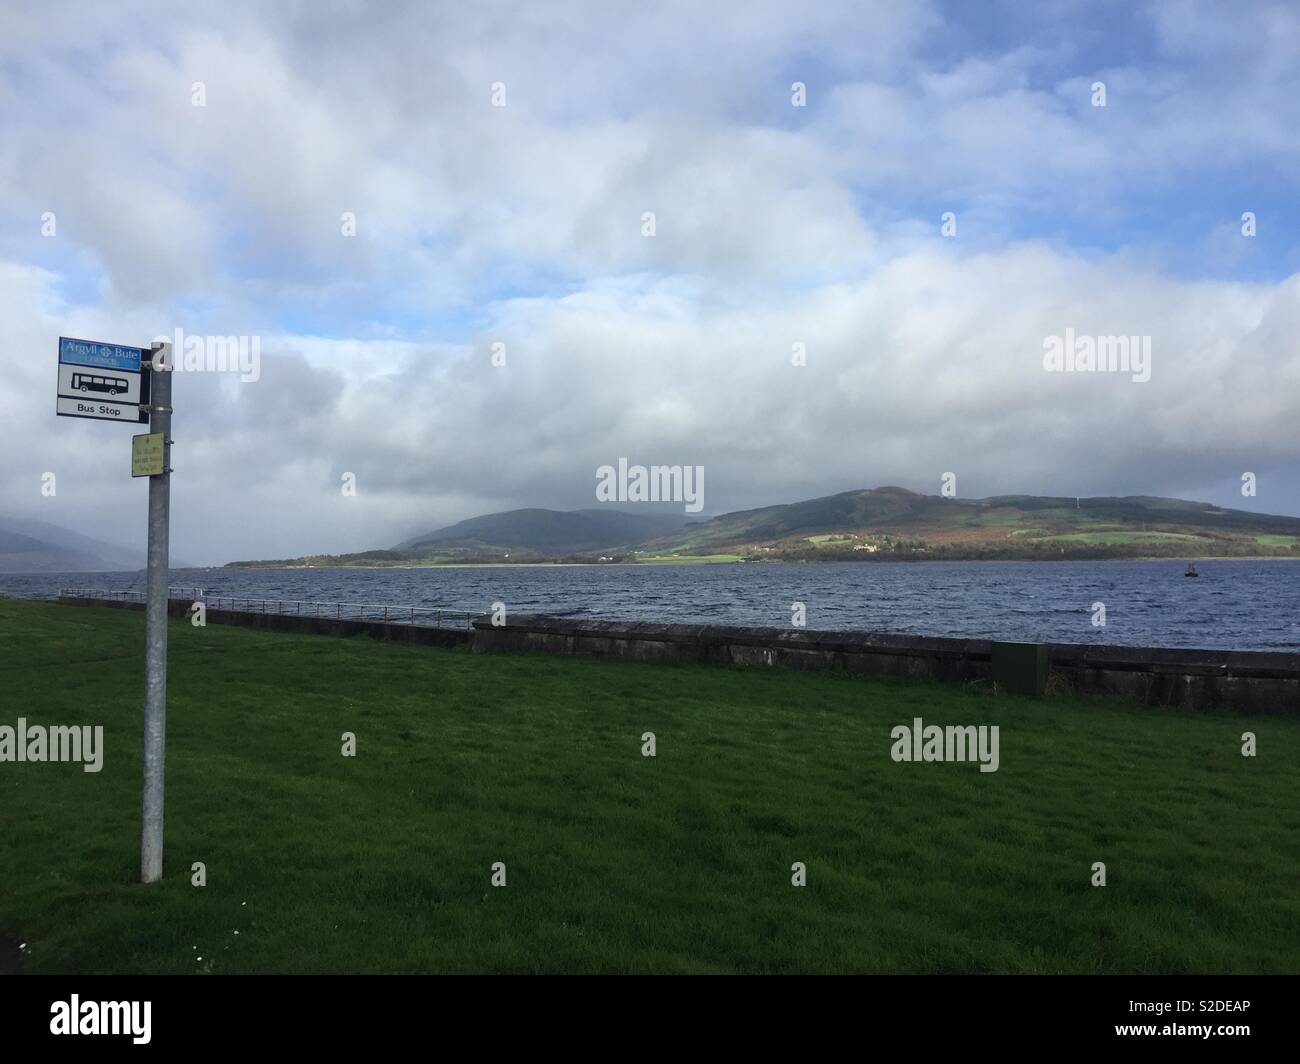 Lonely Bus stop sign in remote empty rural Scottish landscape with hills and sea Stock Photo